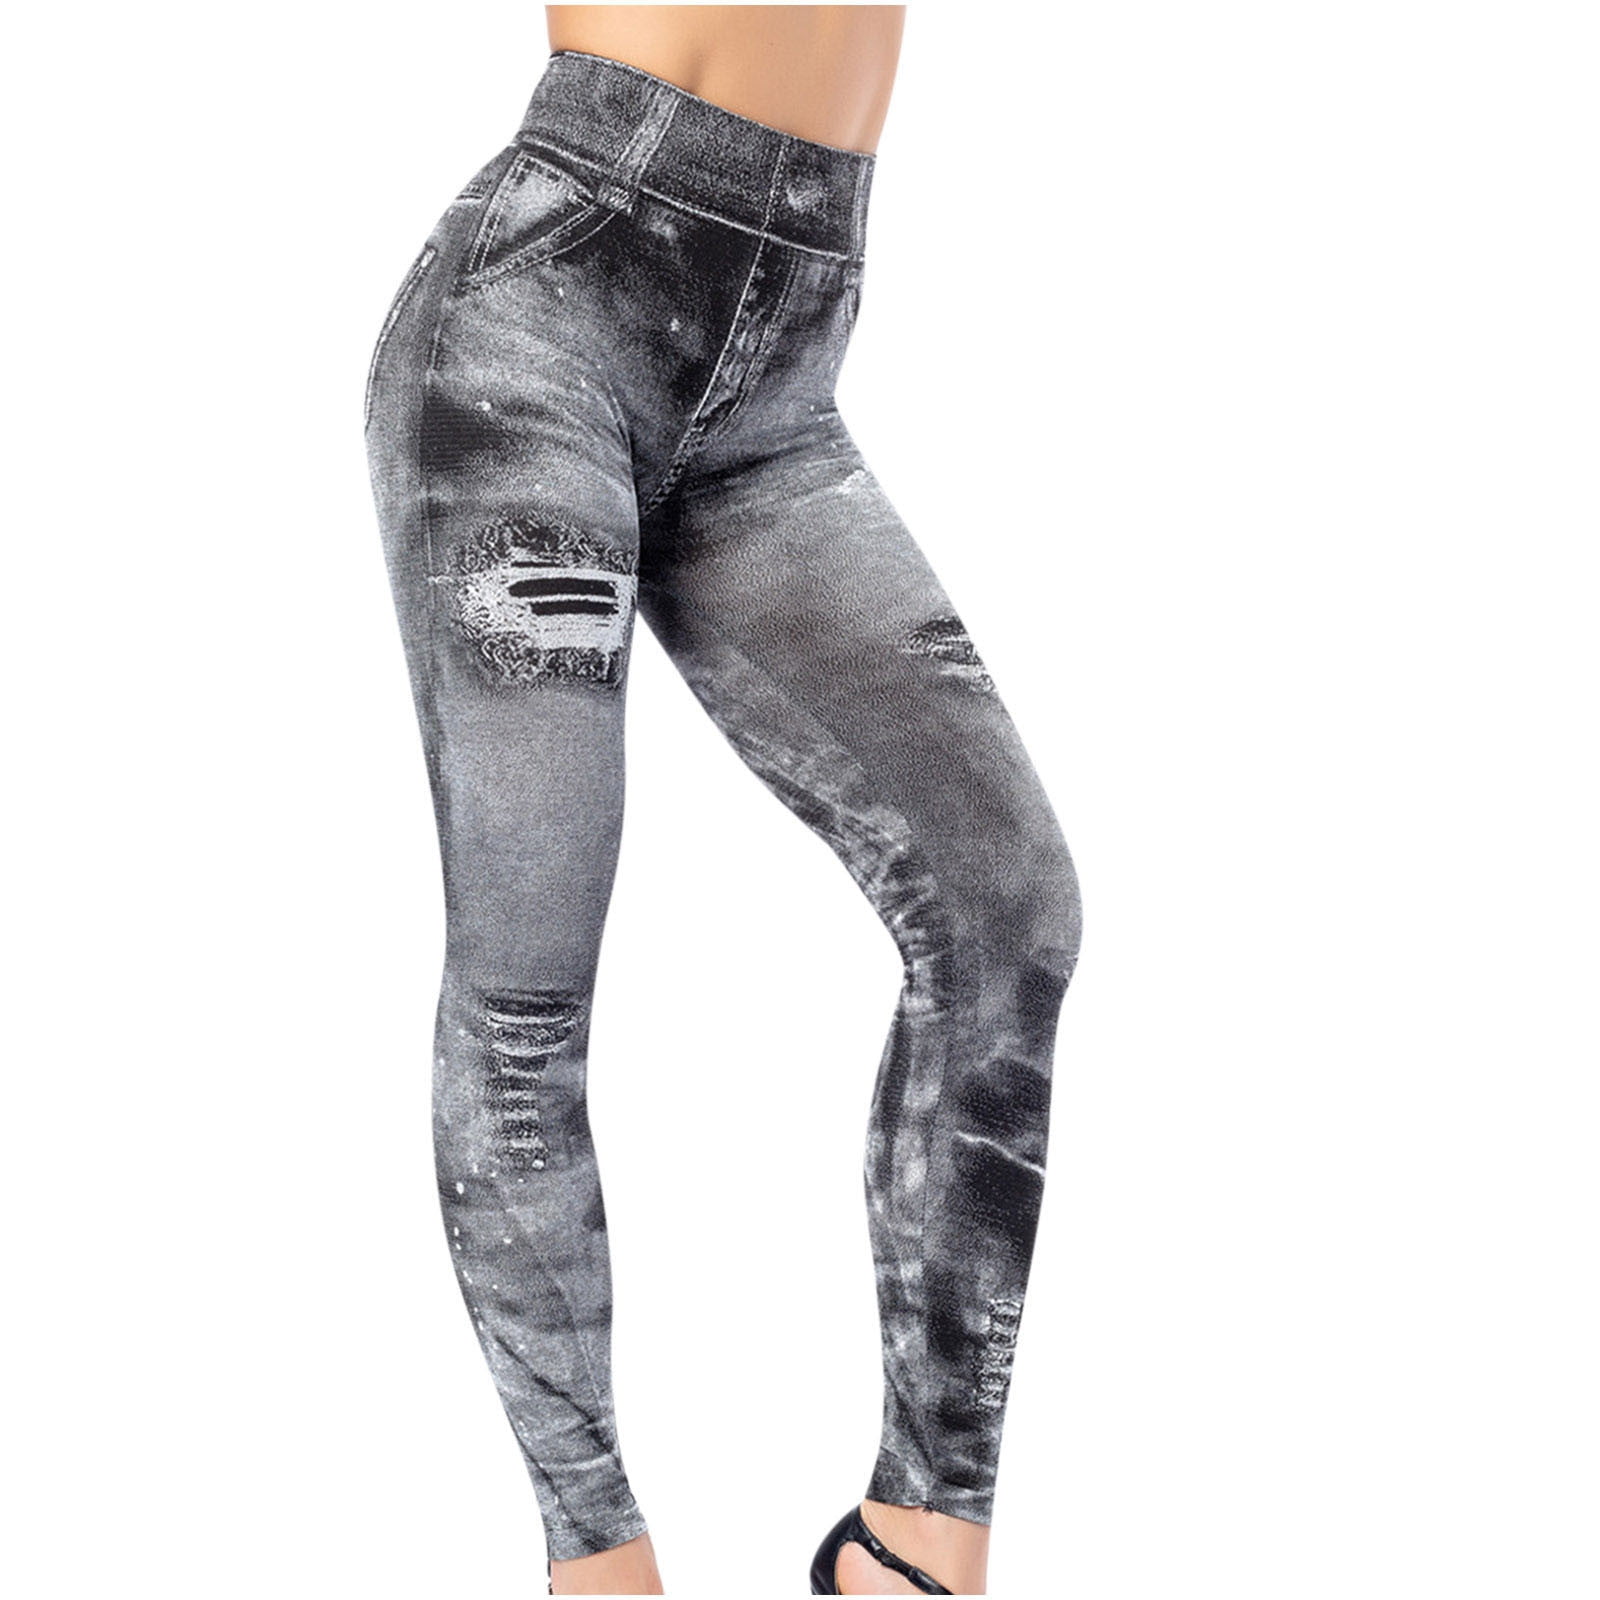 YYDGH Leggings for Women Distressed Ripped Denim Jeggings High Waist Tummy  Control Yoga Pants Stretchy Skinny Jeans Tights Gray XXL 